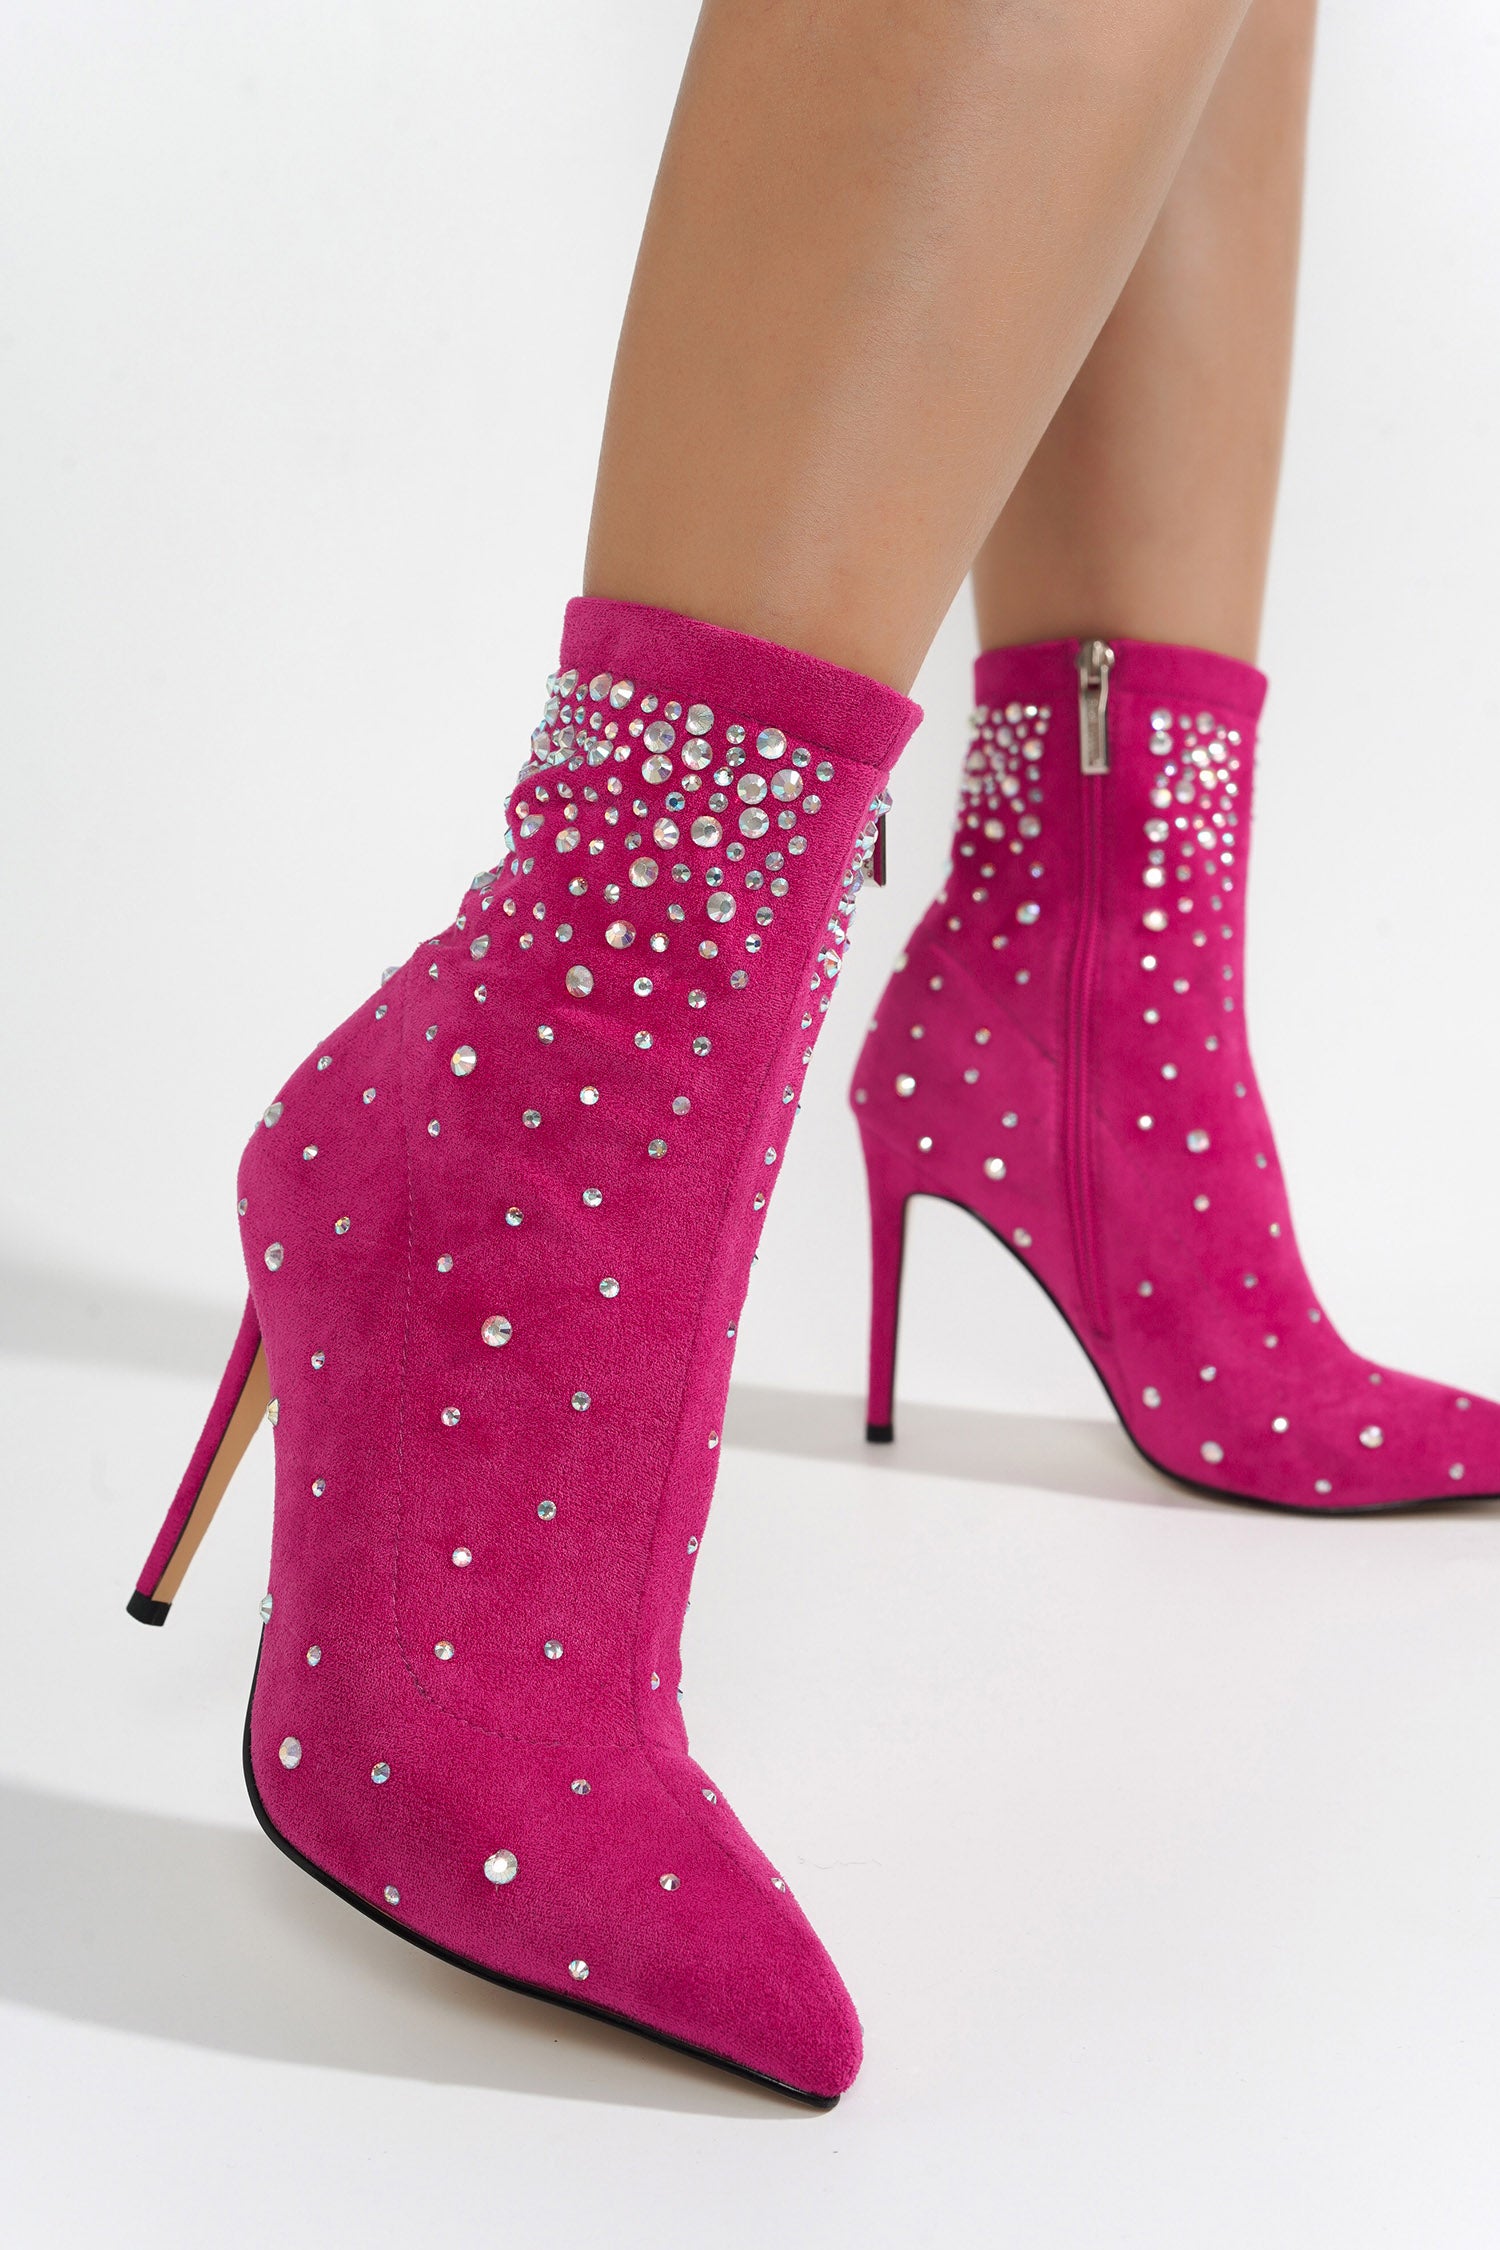 UrbanOG - Claremont Rhinestone-Crusted Ankle Boots - BOOTIES